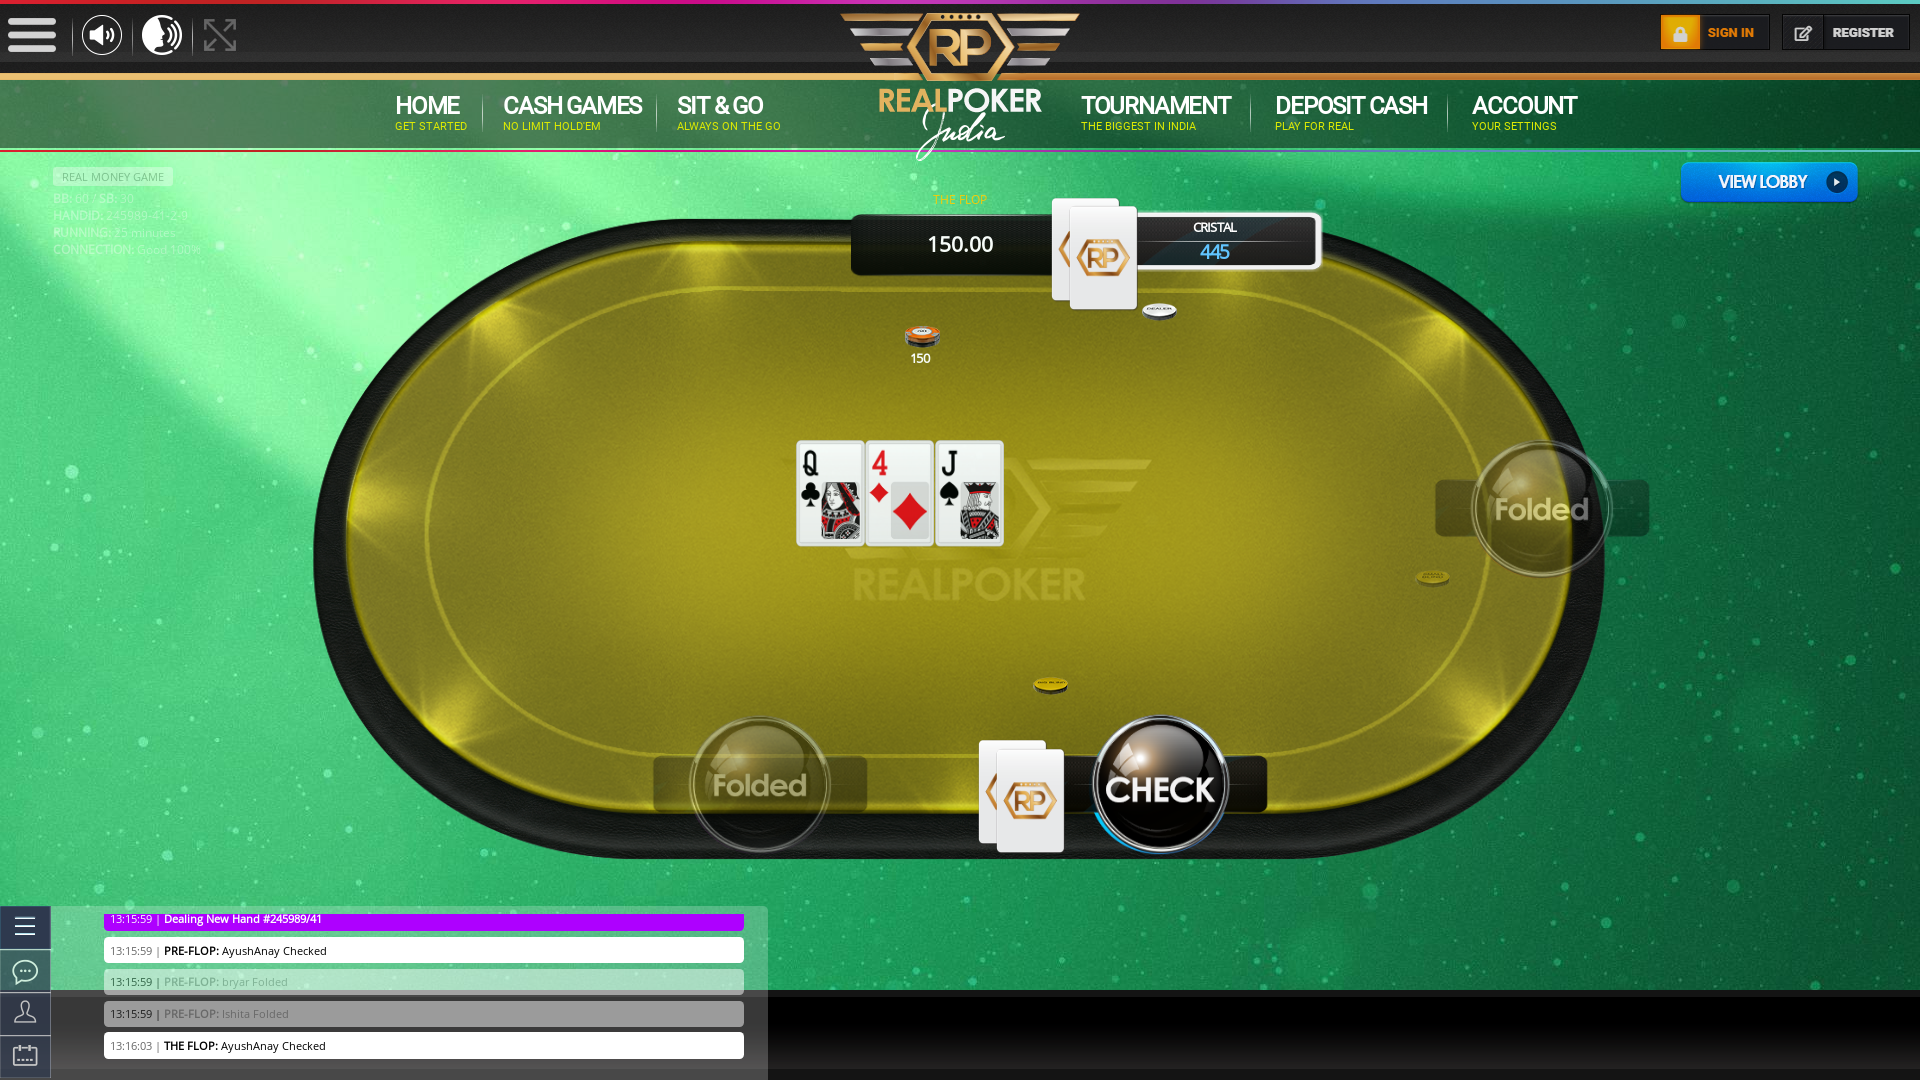 Dwarka, New Delhi online poker game on a 10 player table in the 25th minute